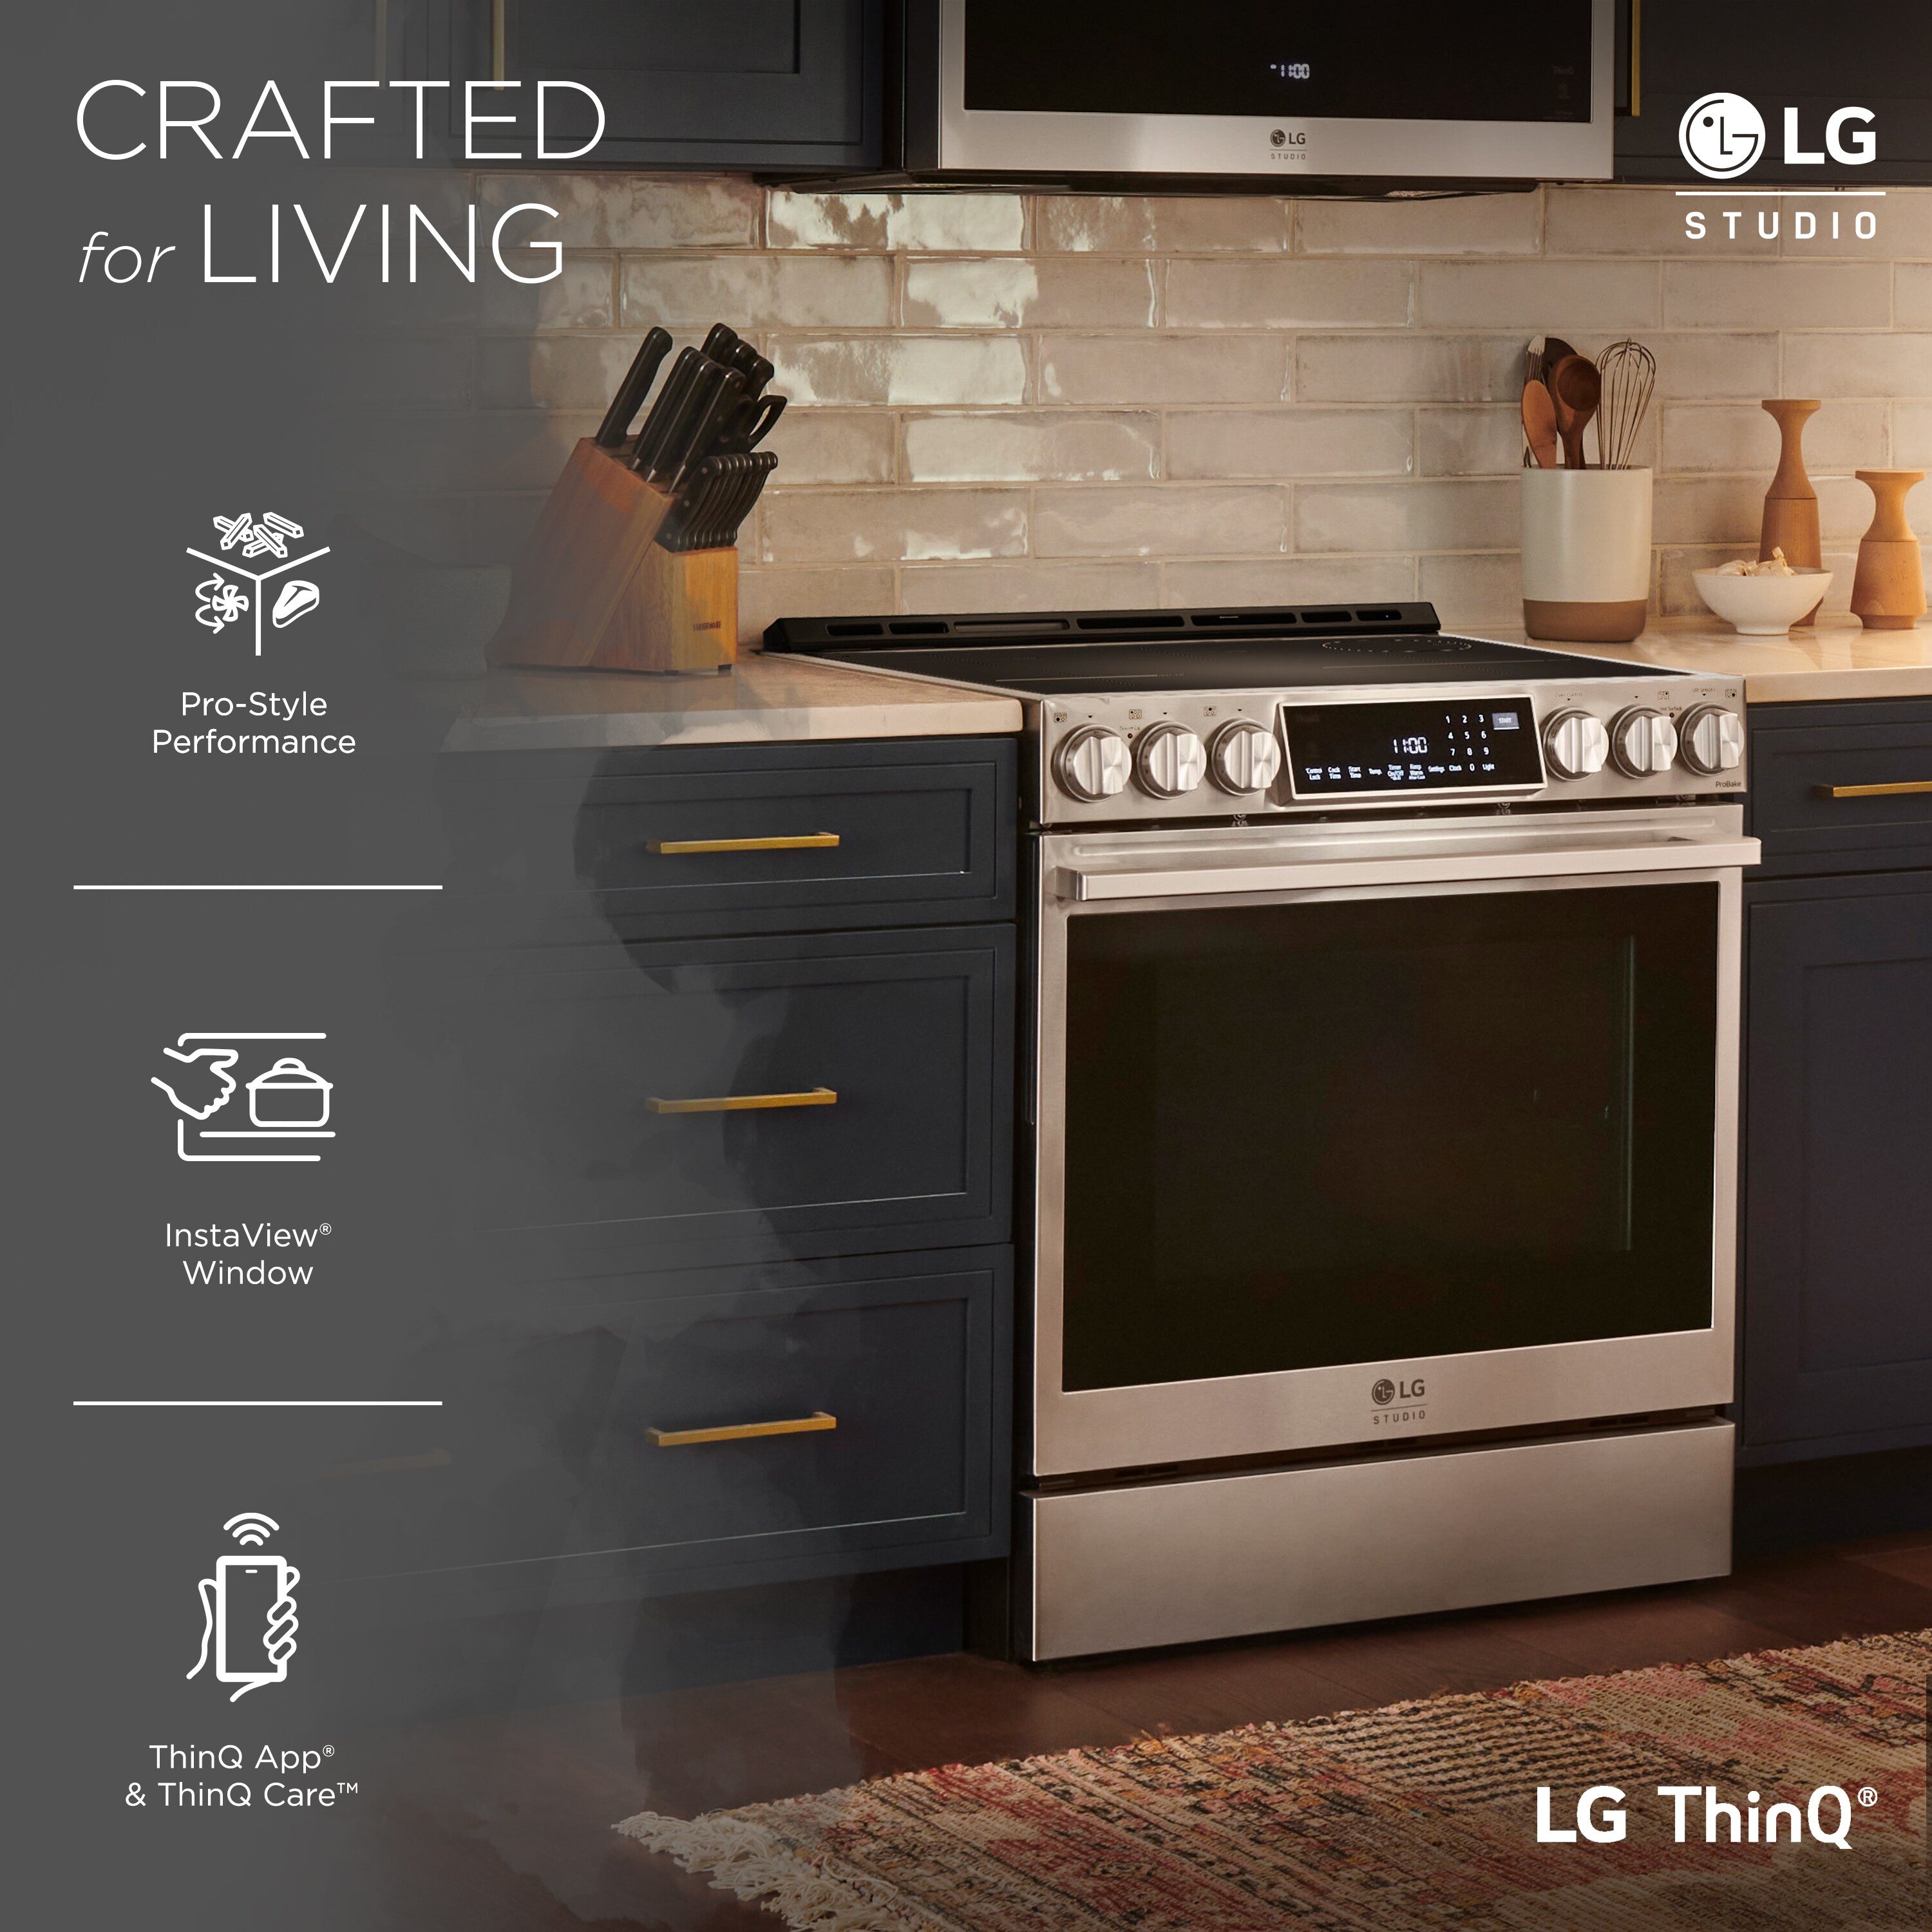 LG Studio 30 in. 6.3 cu. ft. Smart Air Fry Convection Oven Slide-In  Electric Range with 5 Induction Zones - Stainless Steel